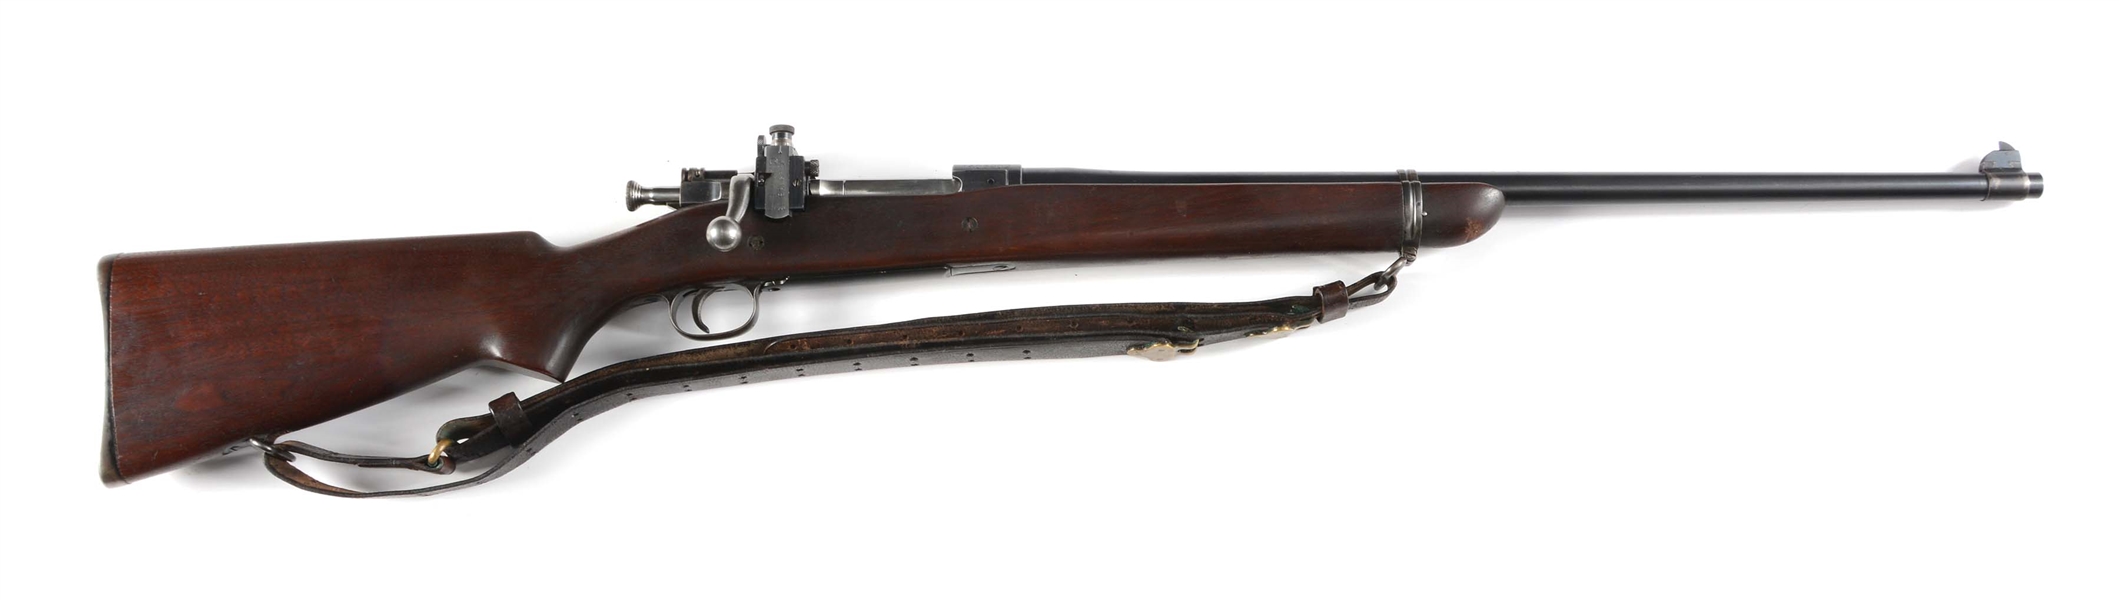 (C) STAR GAUGE US SPRINGFIELD ARMORY MODEL 1903 FACTORY SPORTING RIFLE.